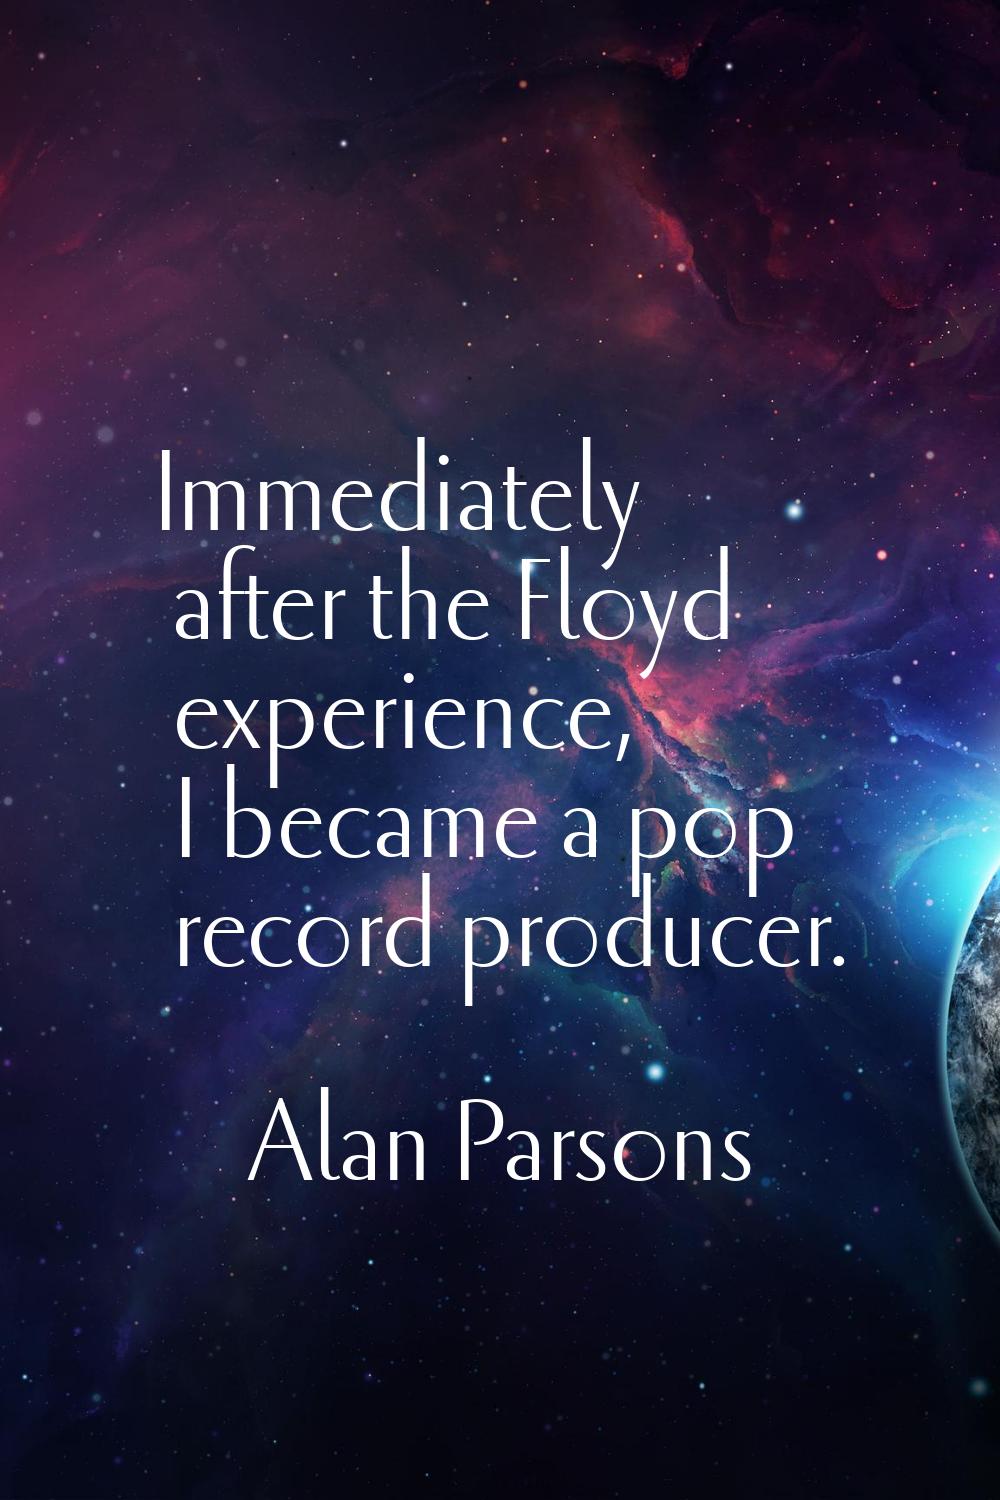 Immediately after the Floyd experience, I became a pop record producer.